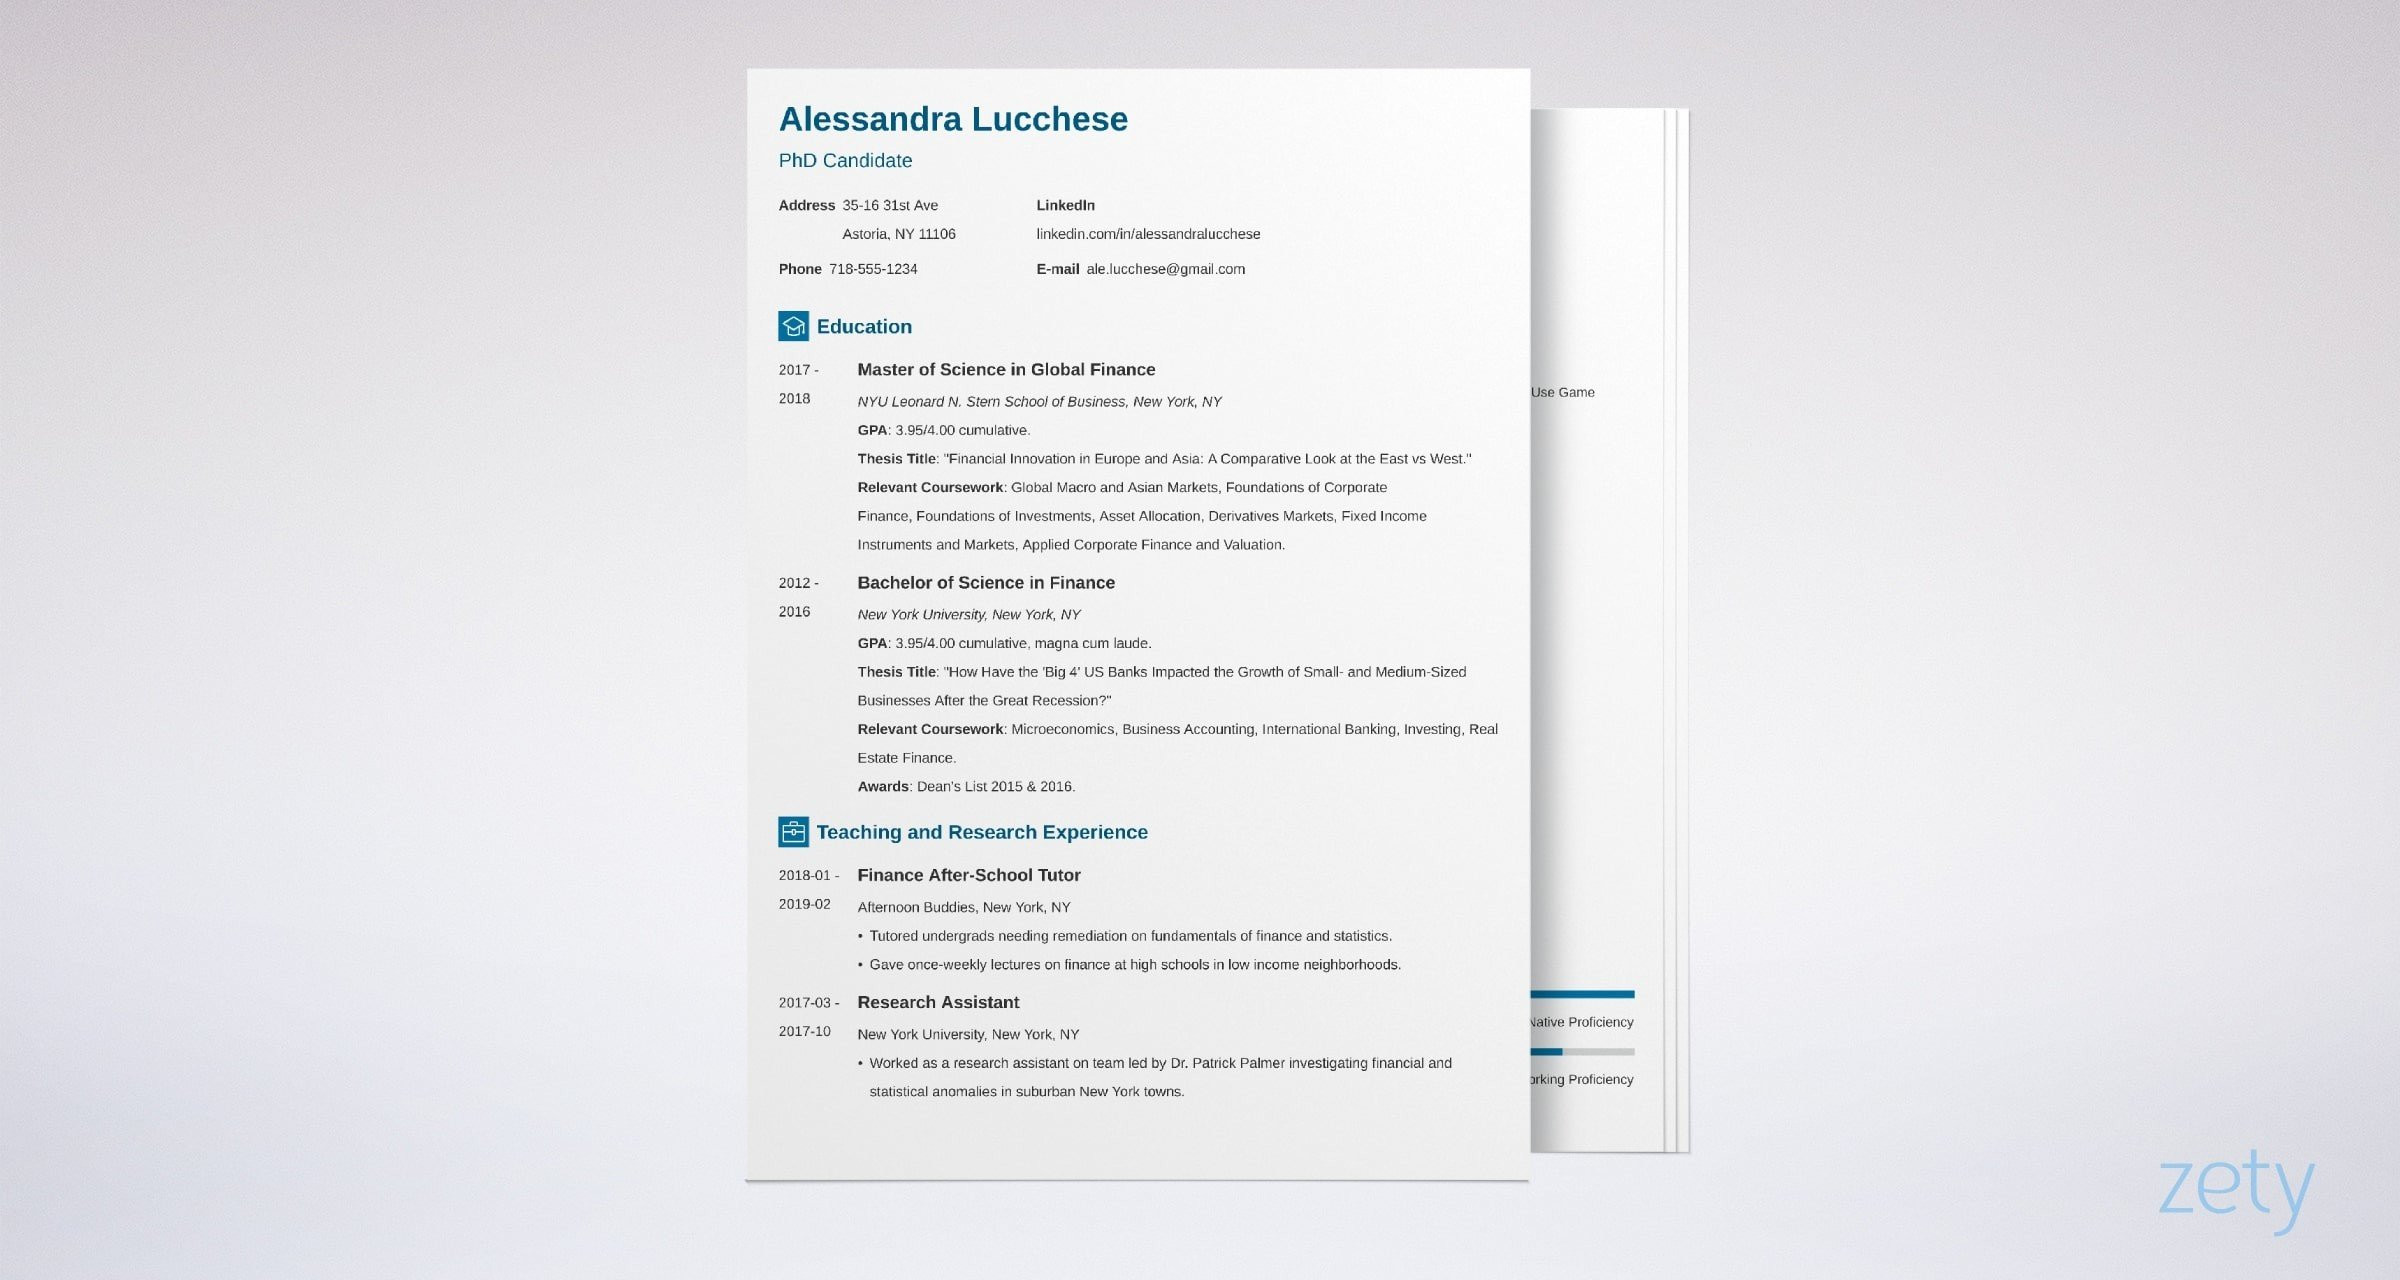 Resume Template for Applying to Graduate School Resume for Graduate School Application [template & Examples]